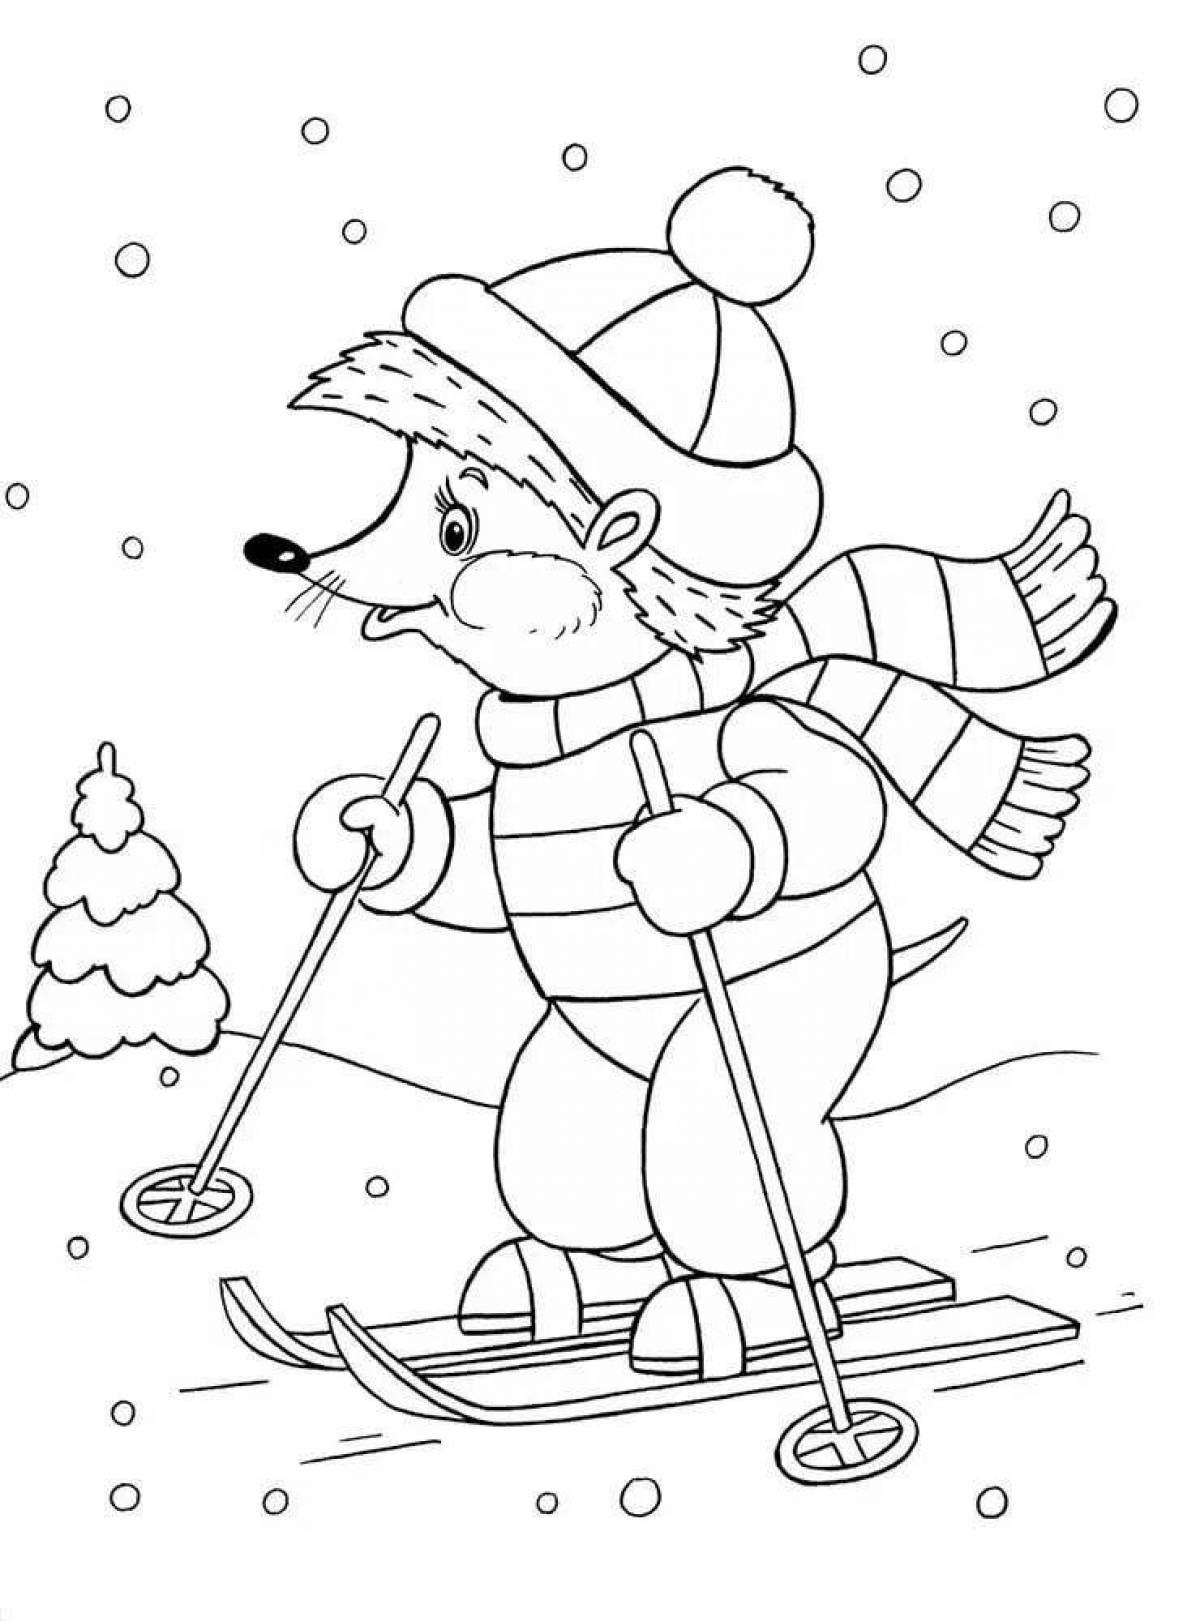 Amazing coloring pages for kids winter 2 3 years old